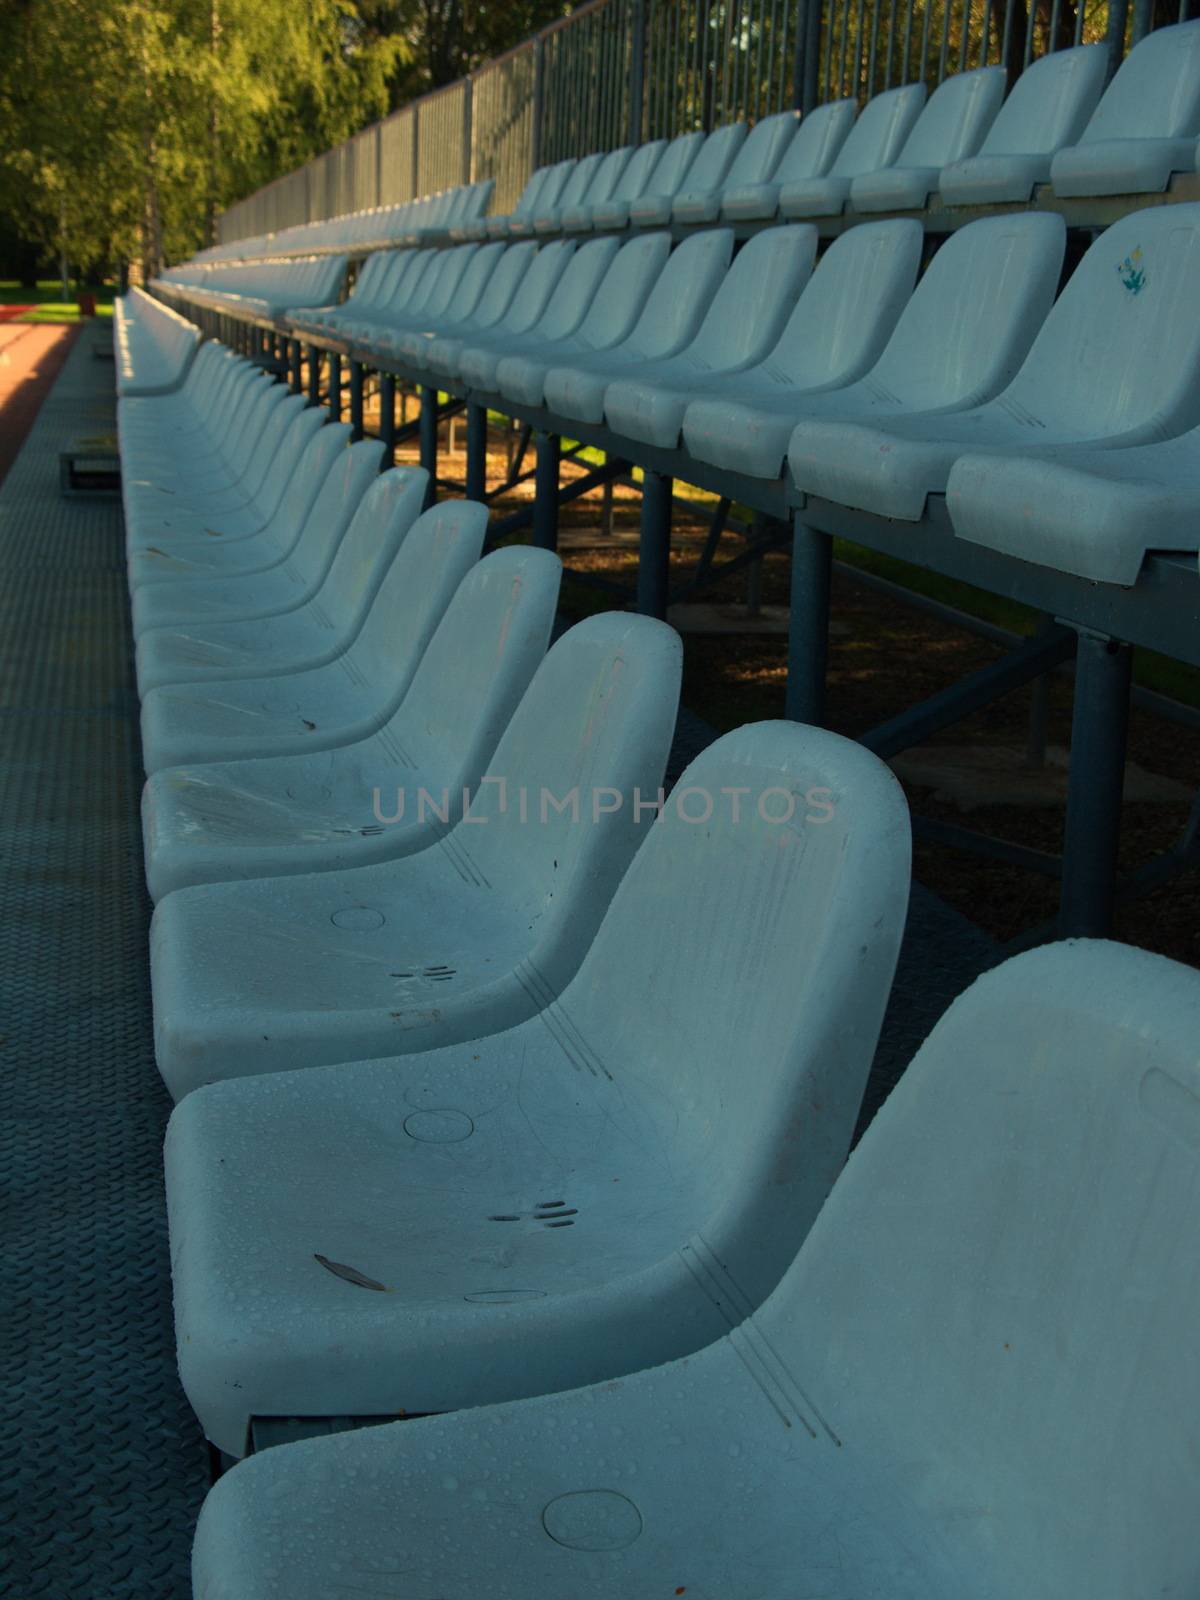 Rows of chairs in a stadium by dolfinvik